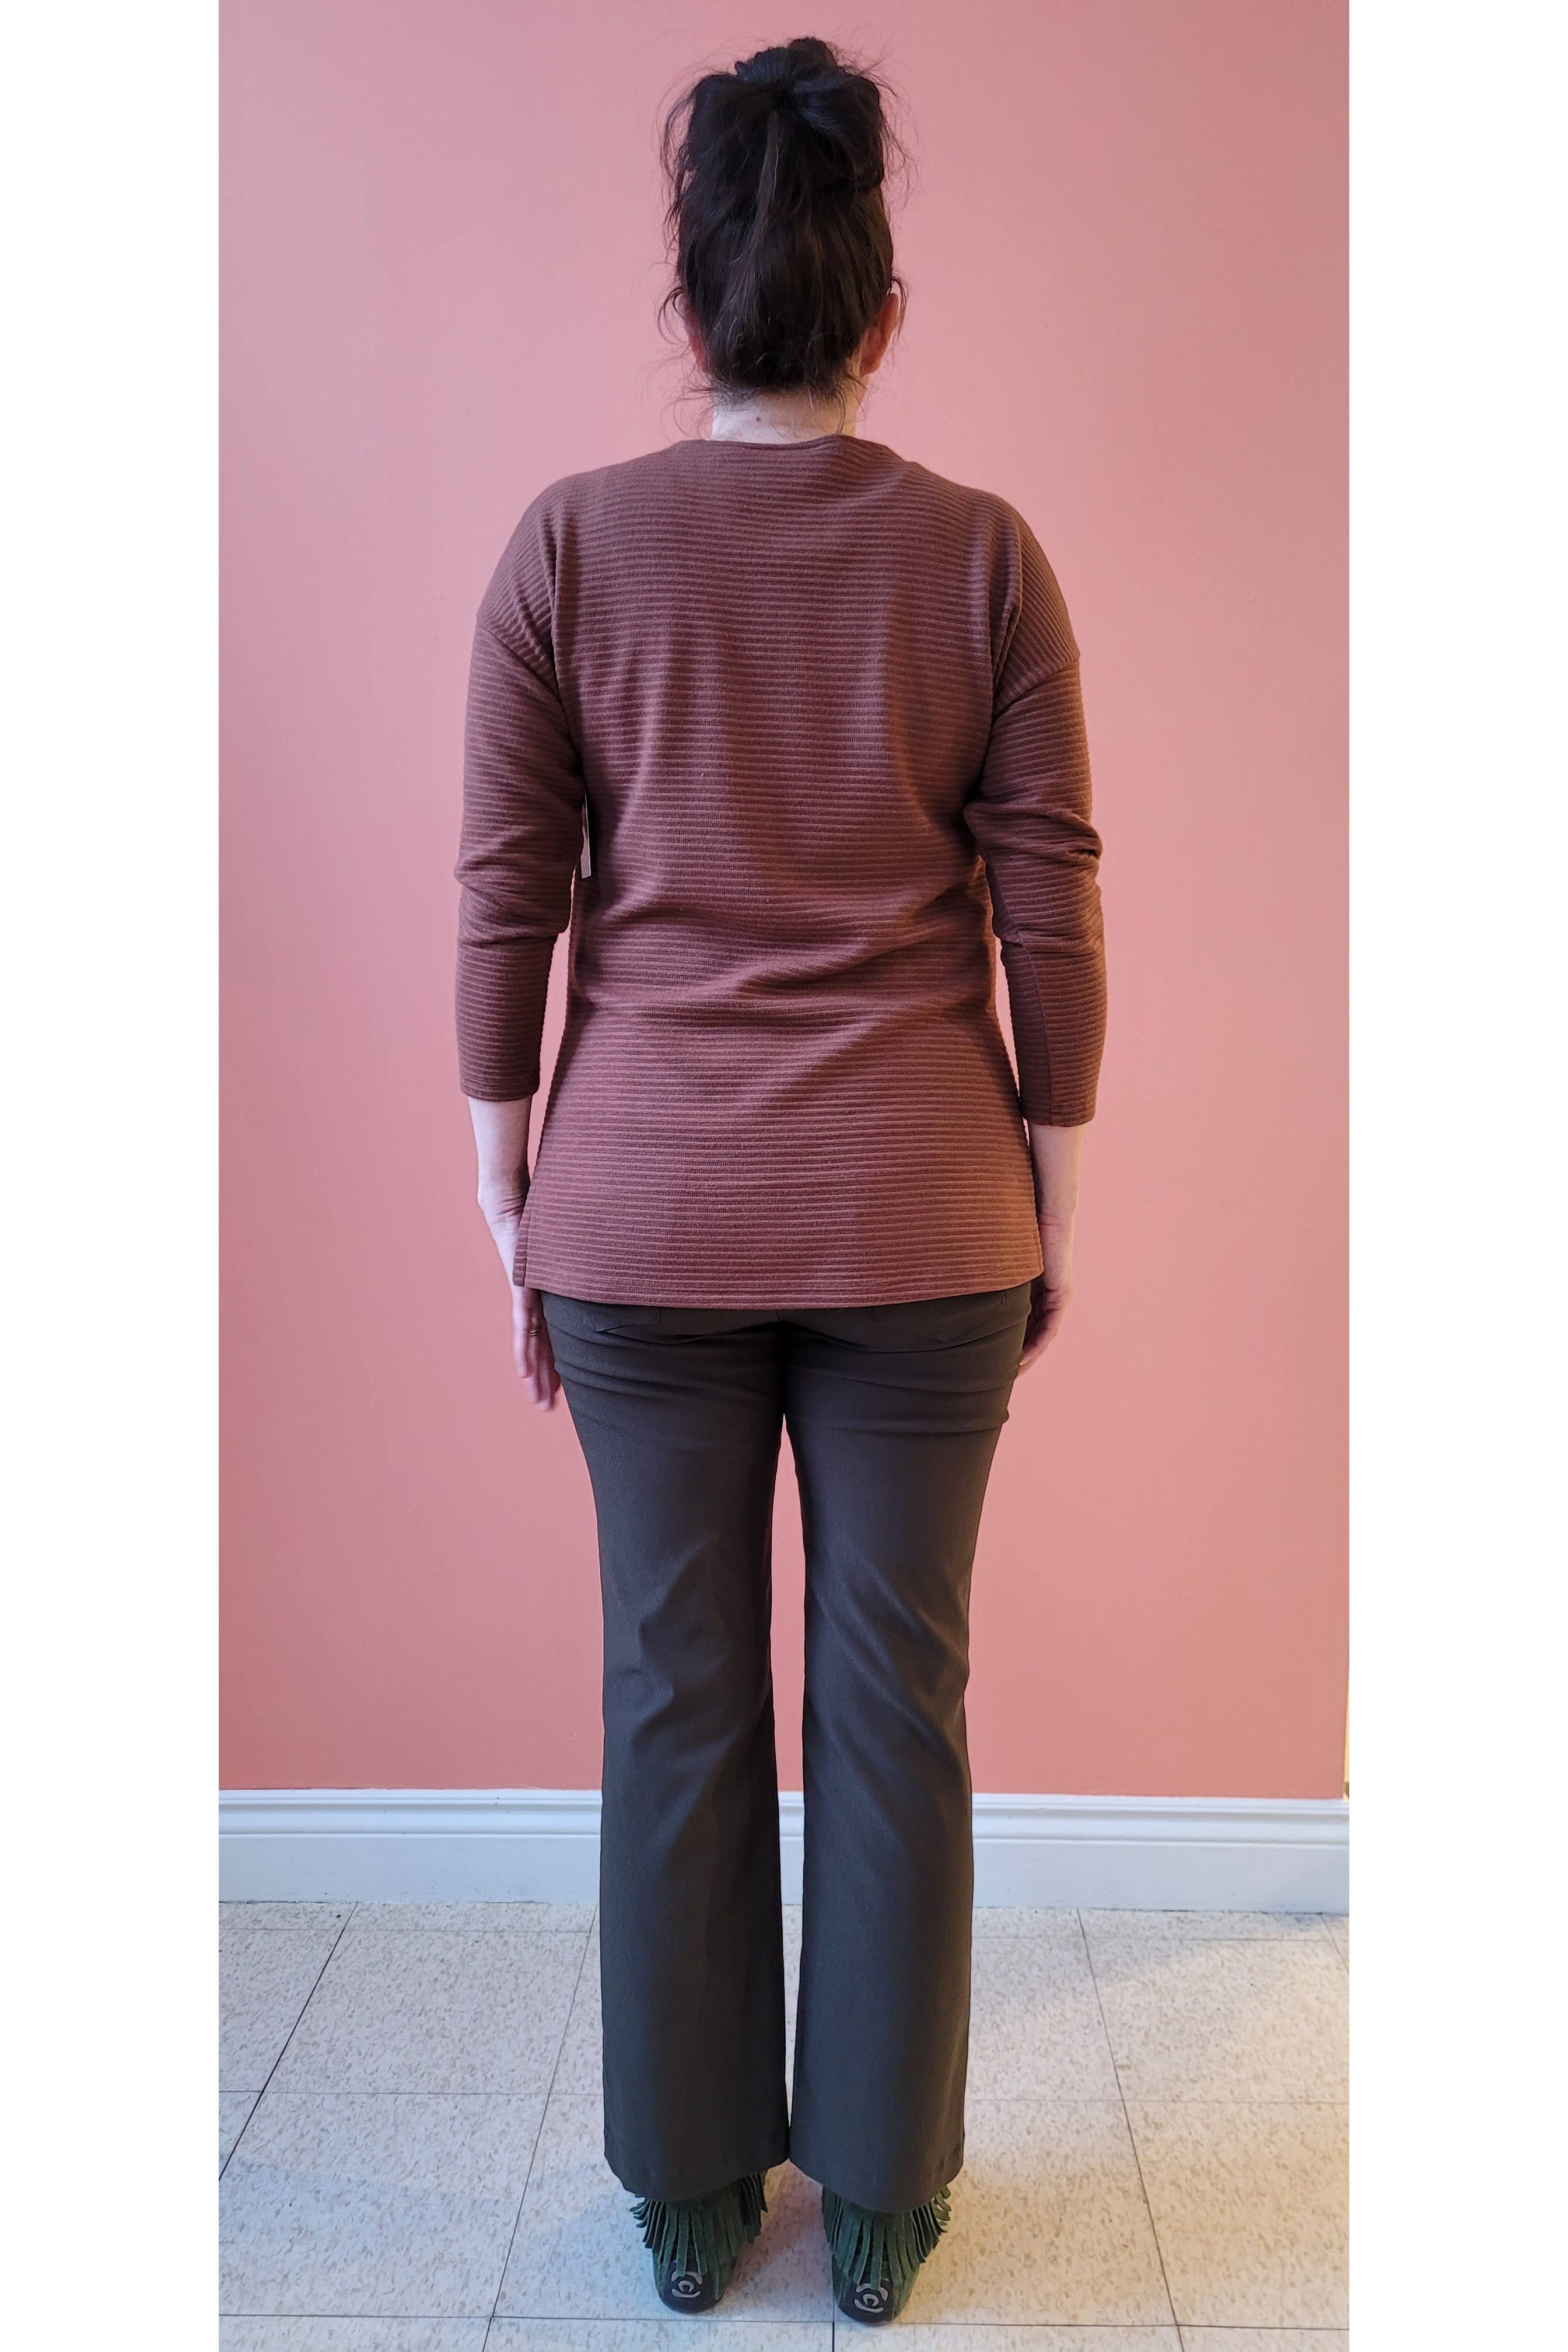 Roma Stretch Twill Pants by Studio D, Olive, back view, classic straight-leg cut, slim fit, large patch pockets on the front and back, sizes XS to XL ,made in Ottawa